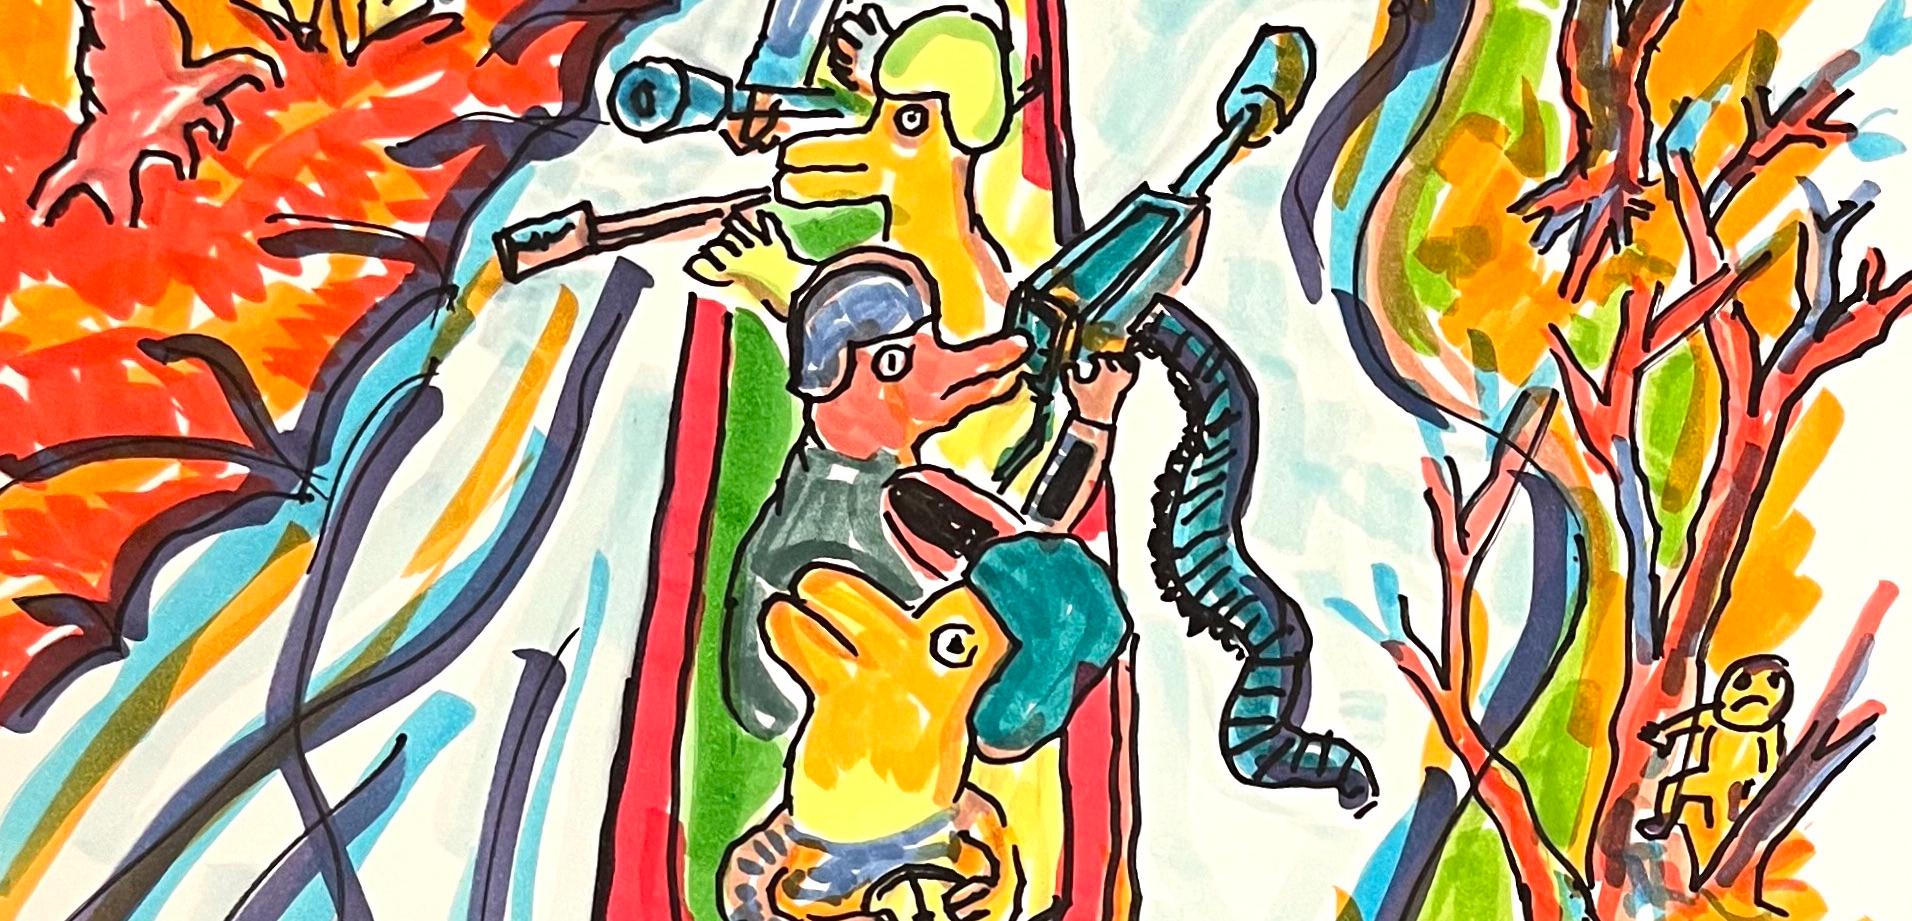 Christmiss - Daniel Johnston, Colorful Figurative Drawing, Duck Wars Series For Sale 2